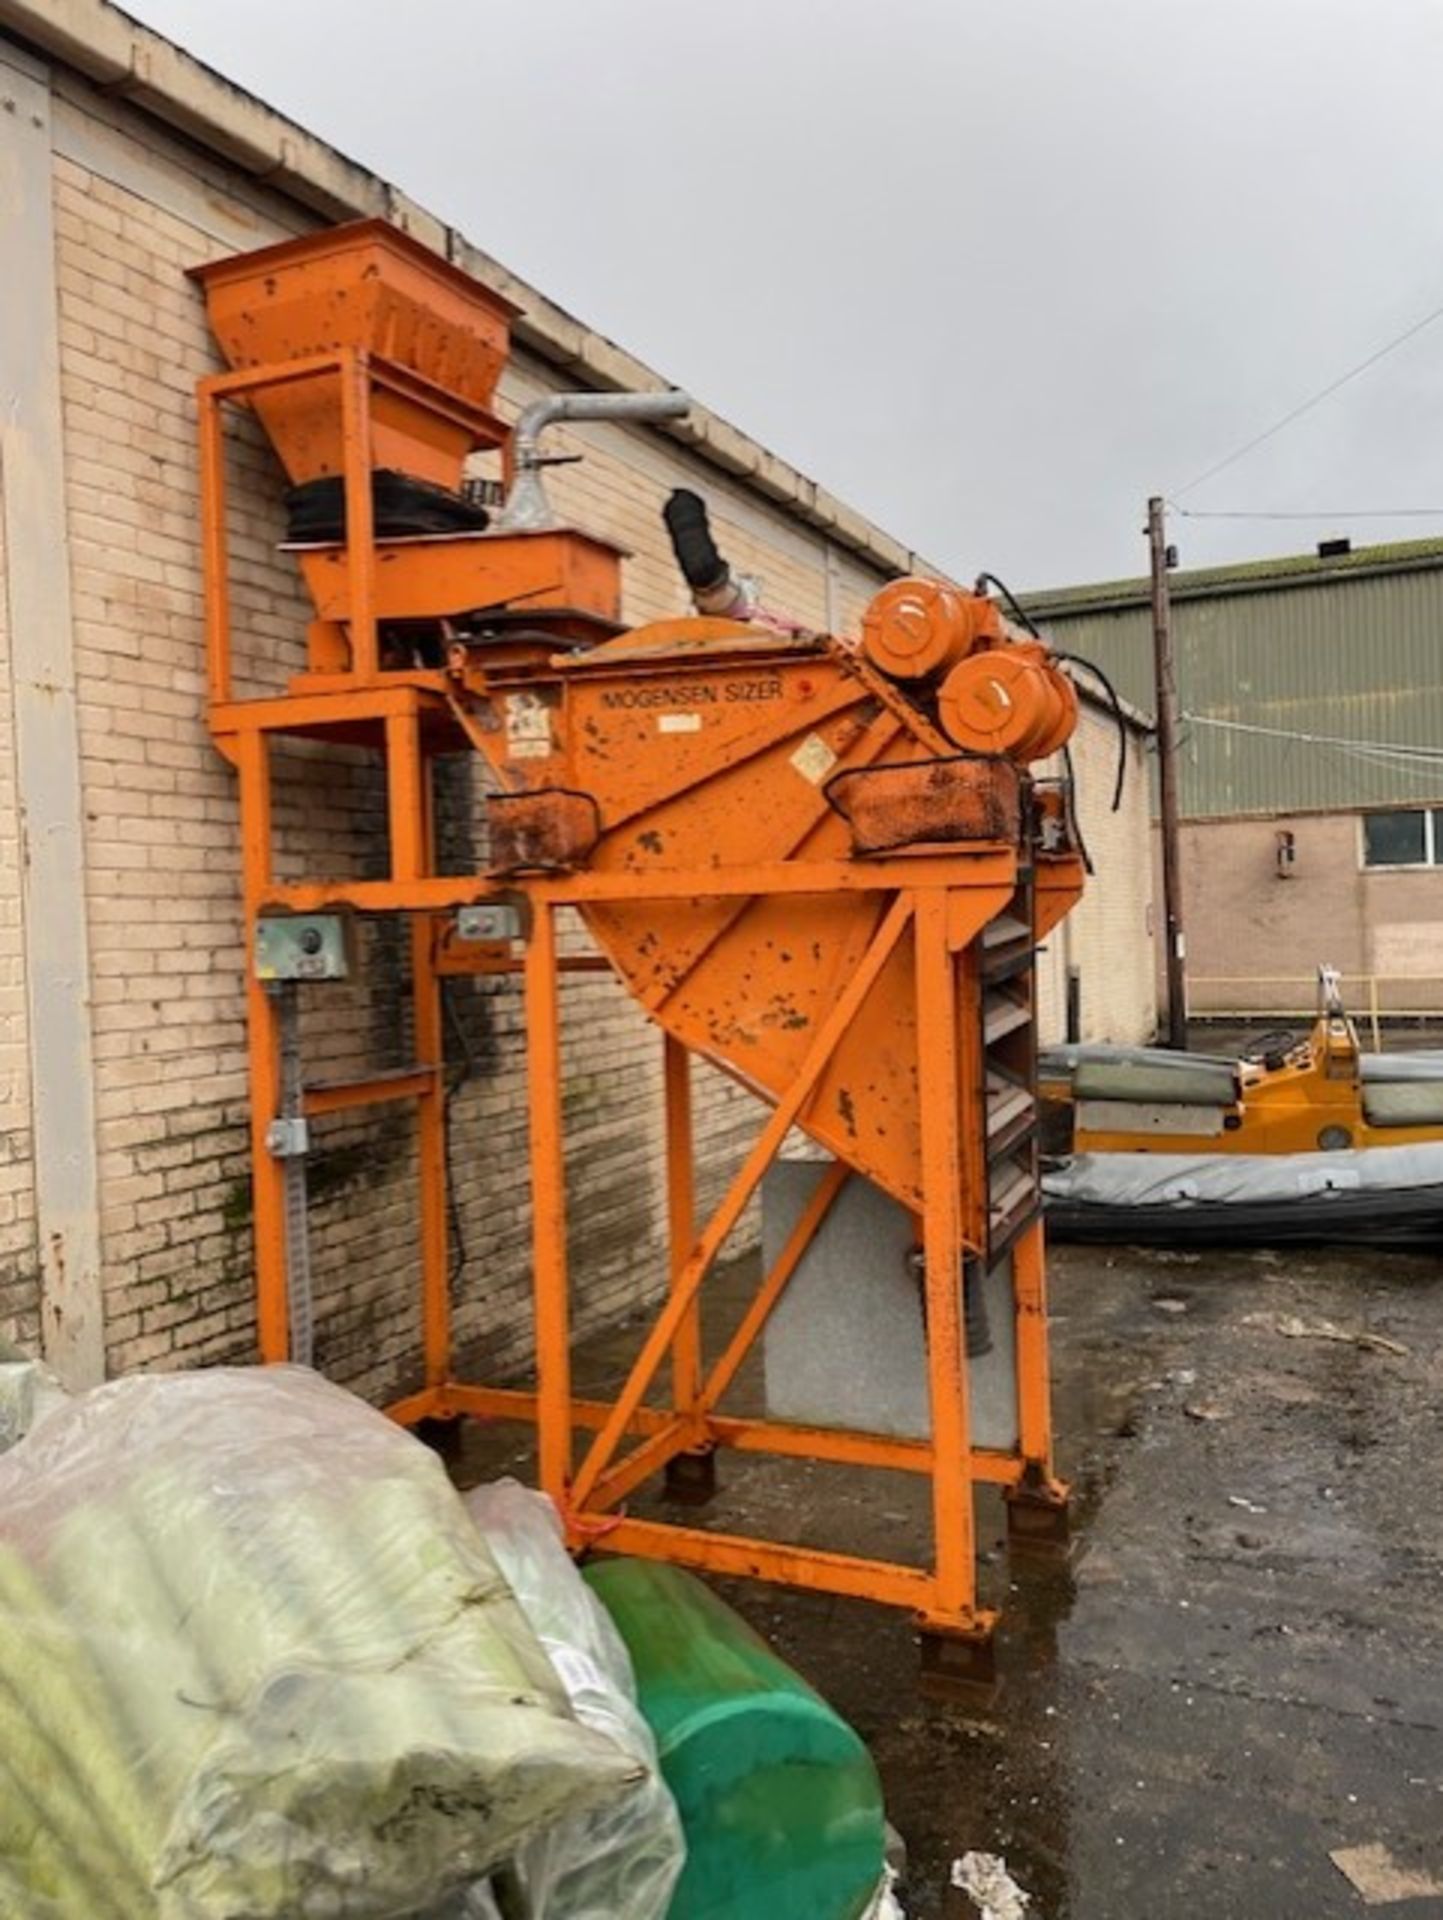 Crusher for crushing bricks 3 phase electric motors on it please note it hasnt got the  power to - Image 3 of 3